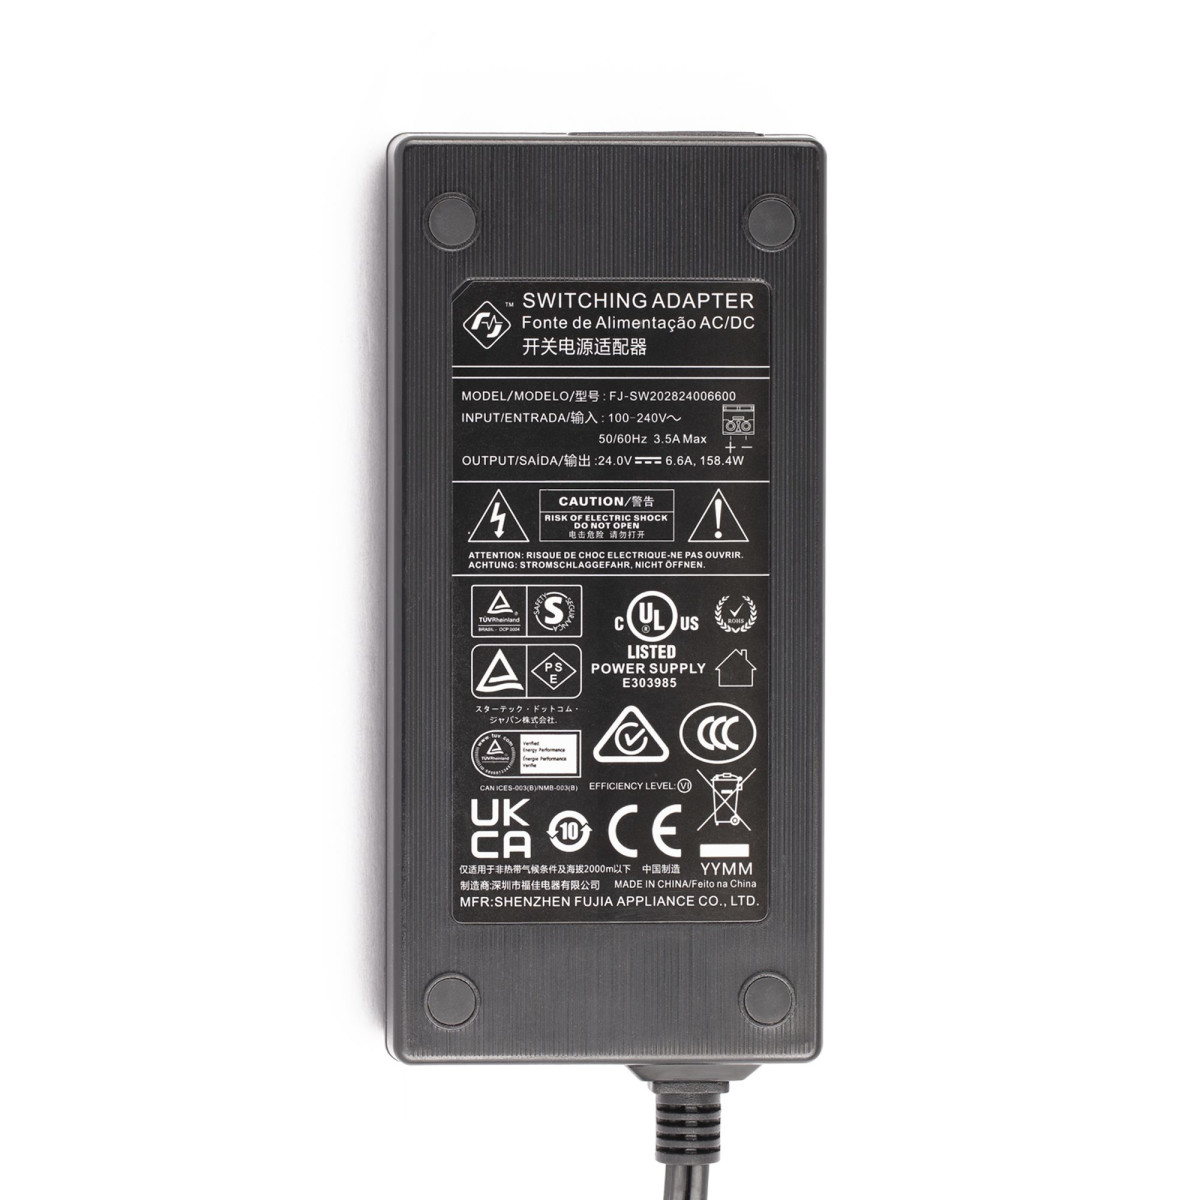 AC/DC Power Adapter/Supply For USB Hubs